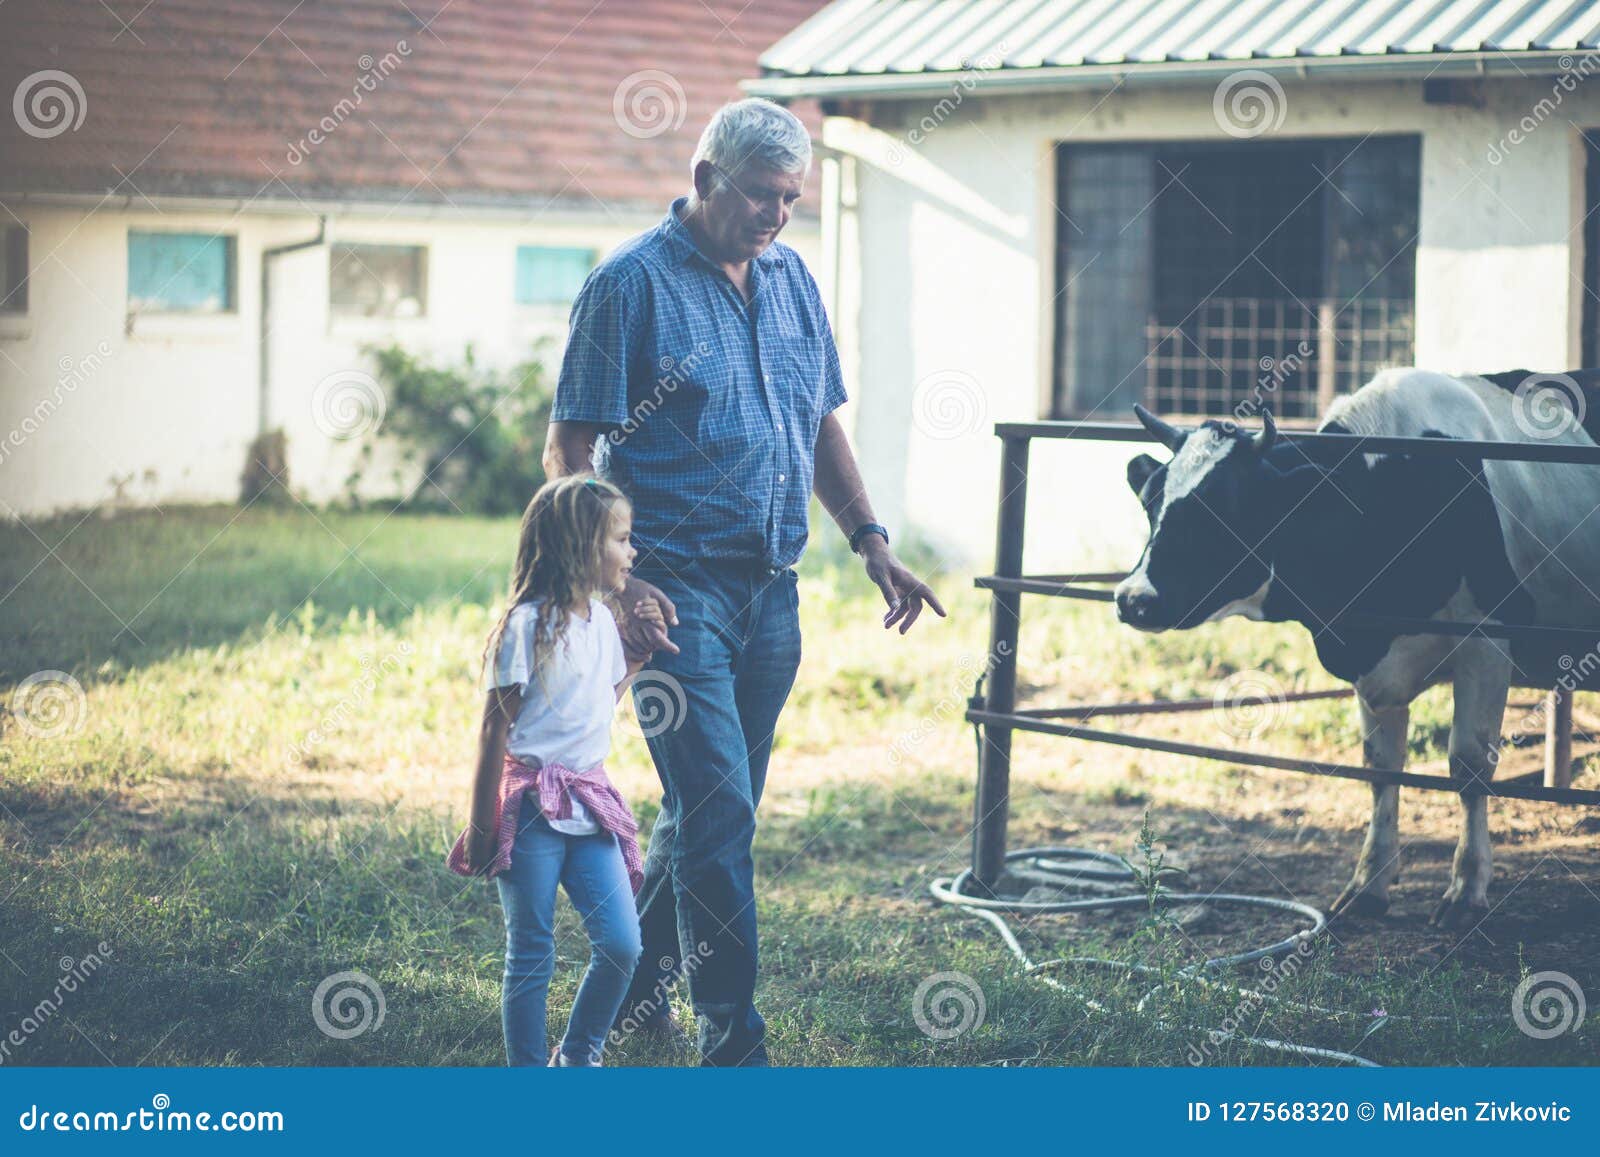 Animals are Important for Human Life. Stock Photo - Image of grandfather,  male: 127568320